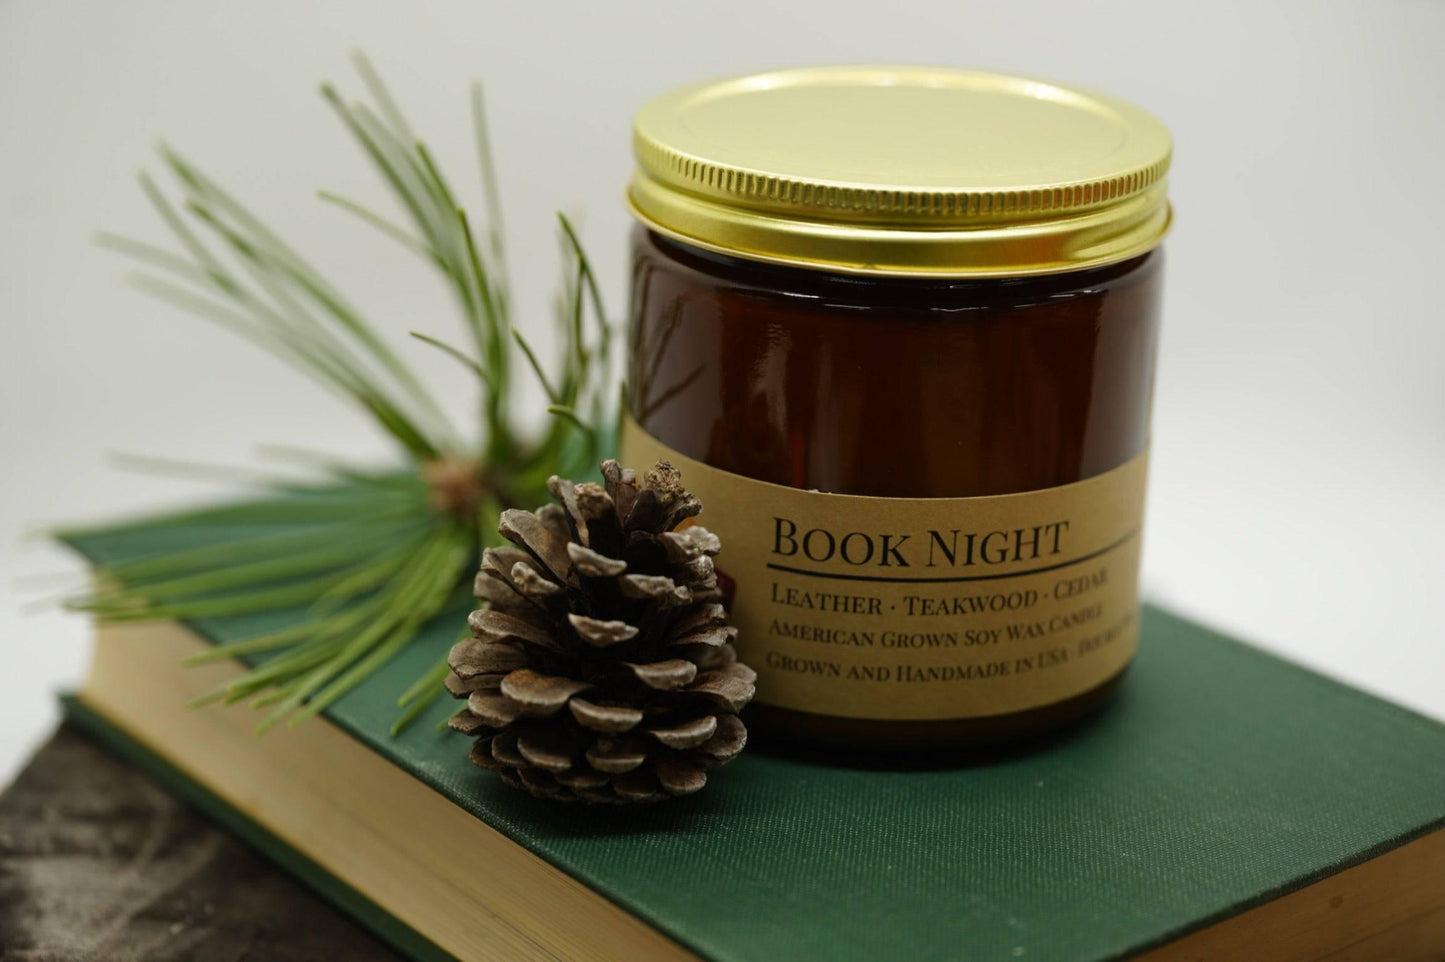 Book Night Soy Wax Candle | 16 oz Double Wick Amber Apothecary Jar Candle - Prairie Fire Candles